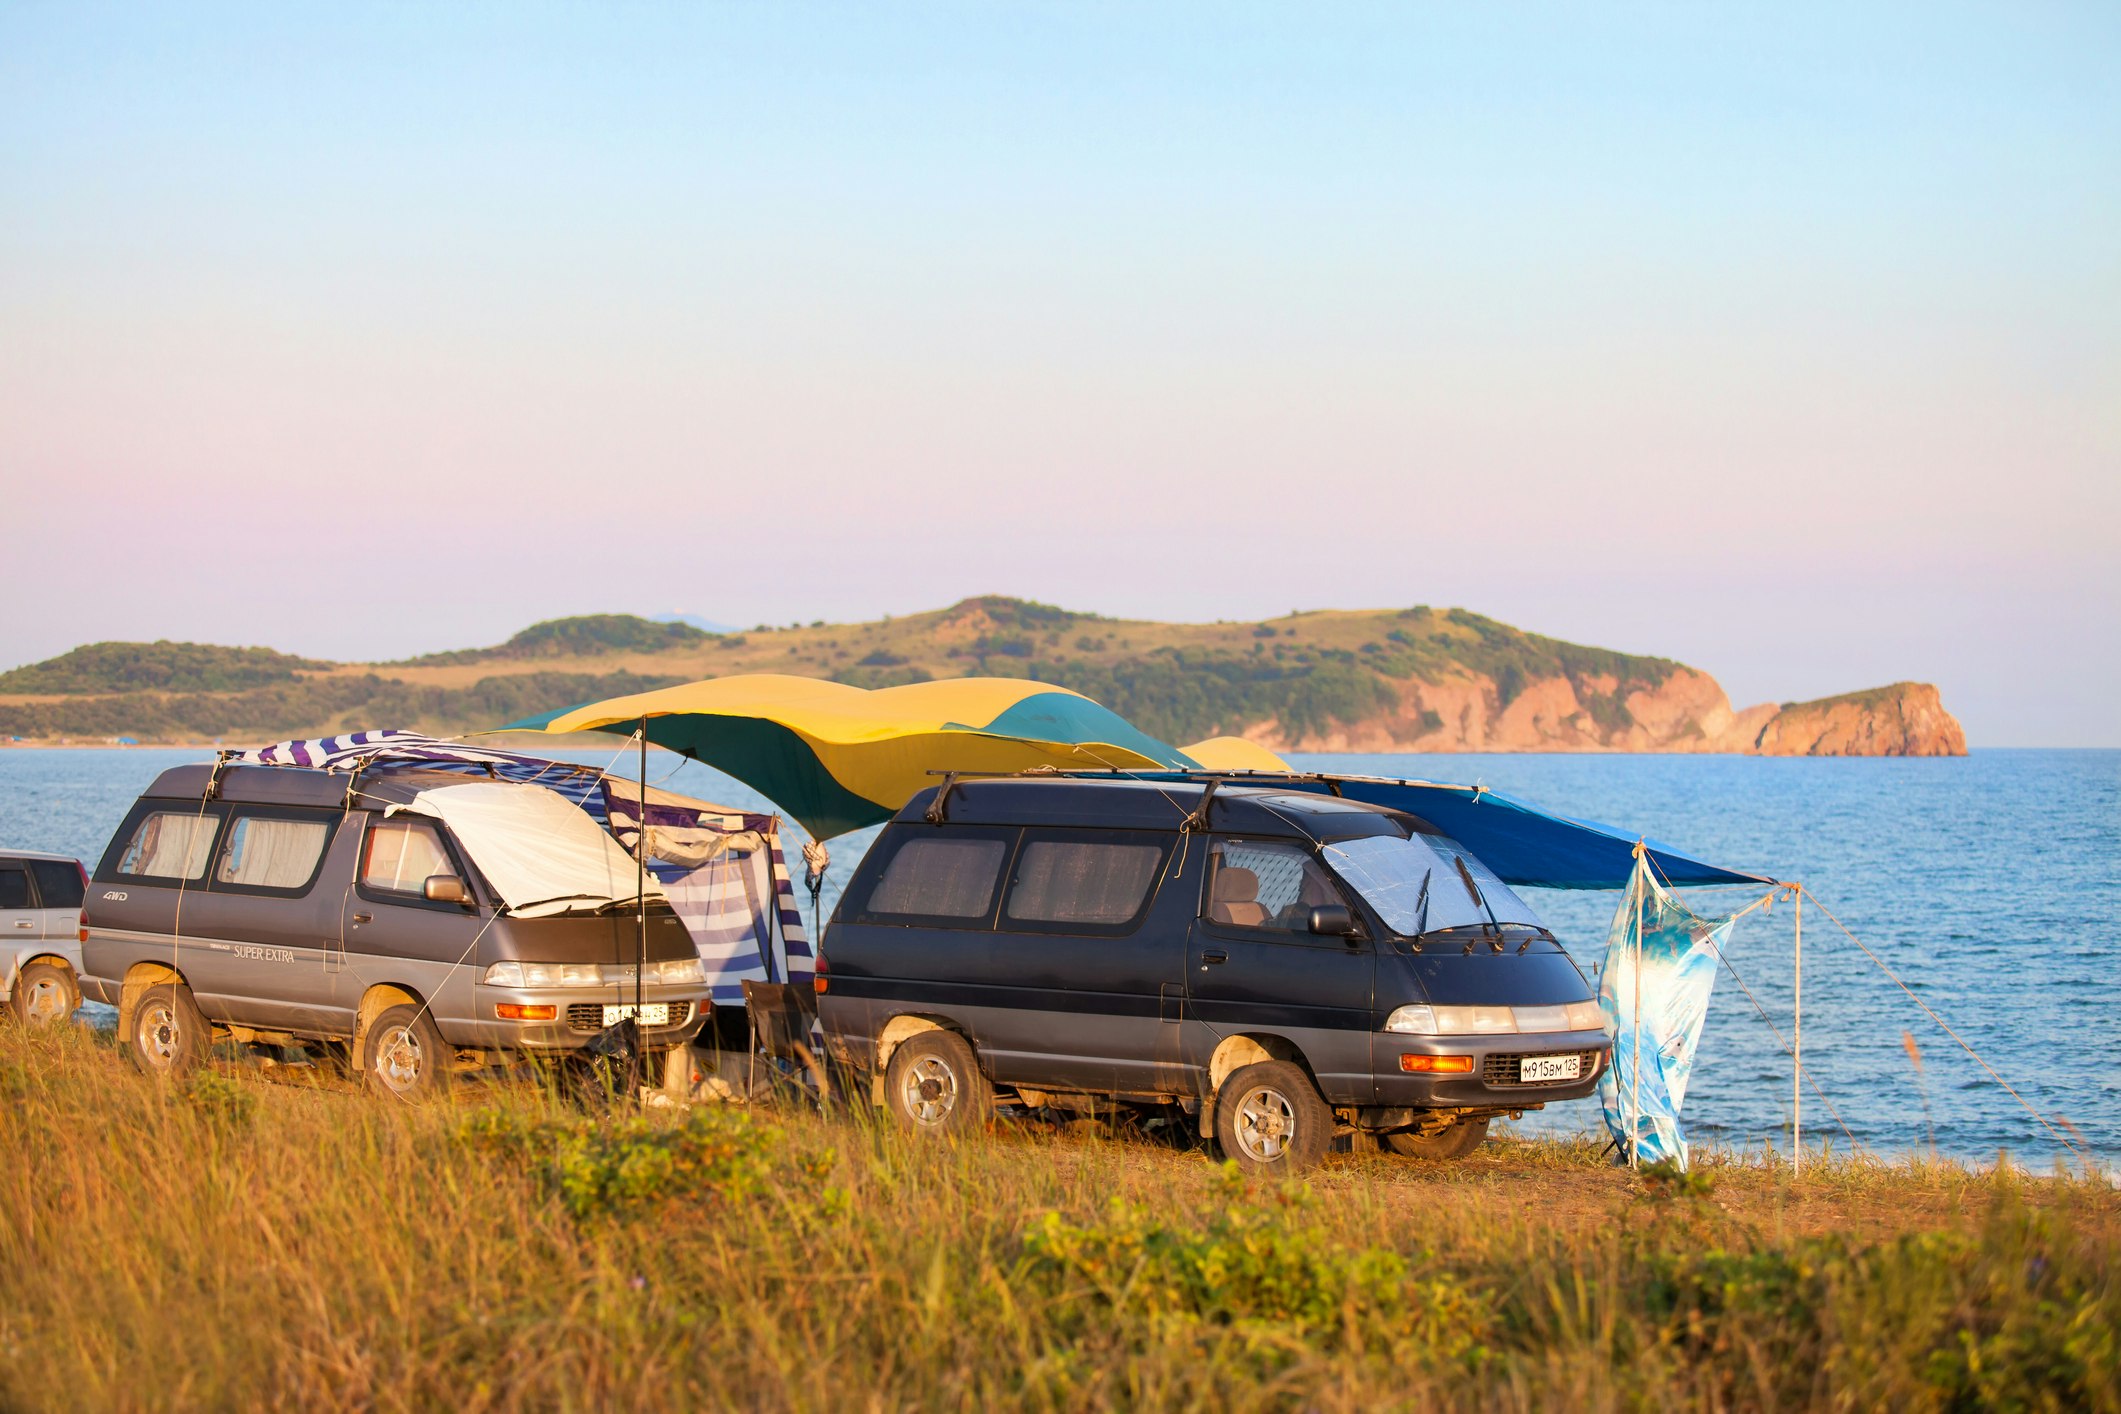 Two Toyota vans are parked by the seashore, with yellow and blue tarps and pop-up canopies to make the impromptu campsite more comfortable.